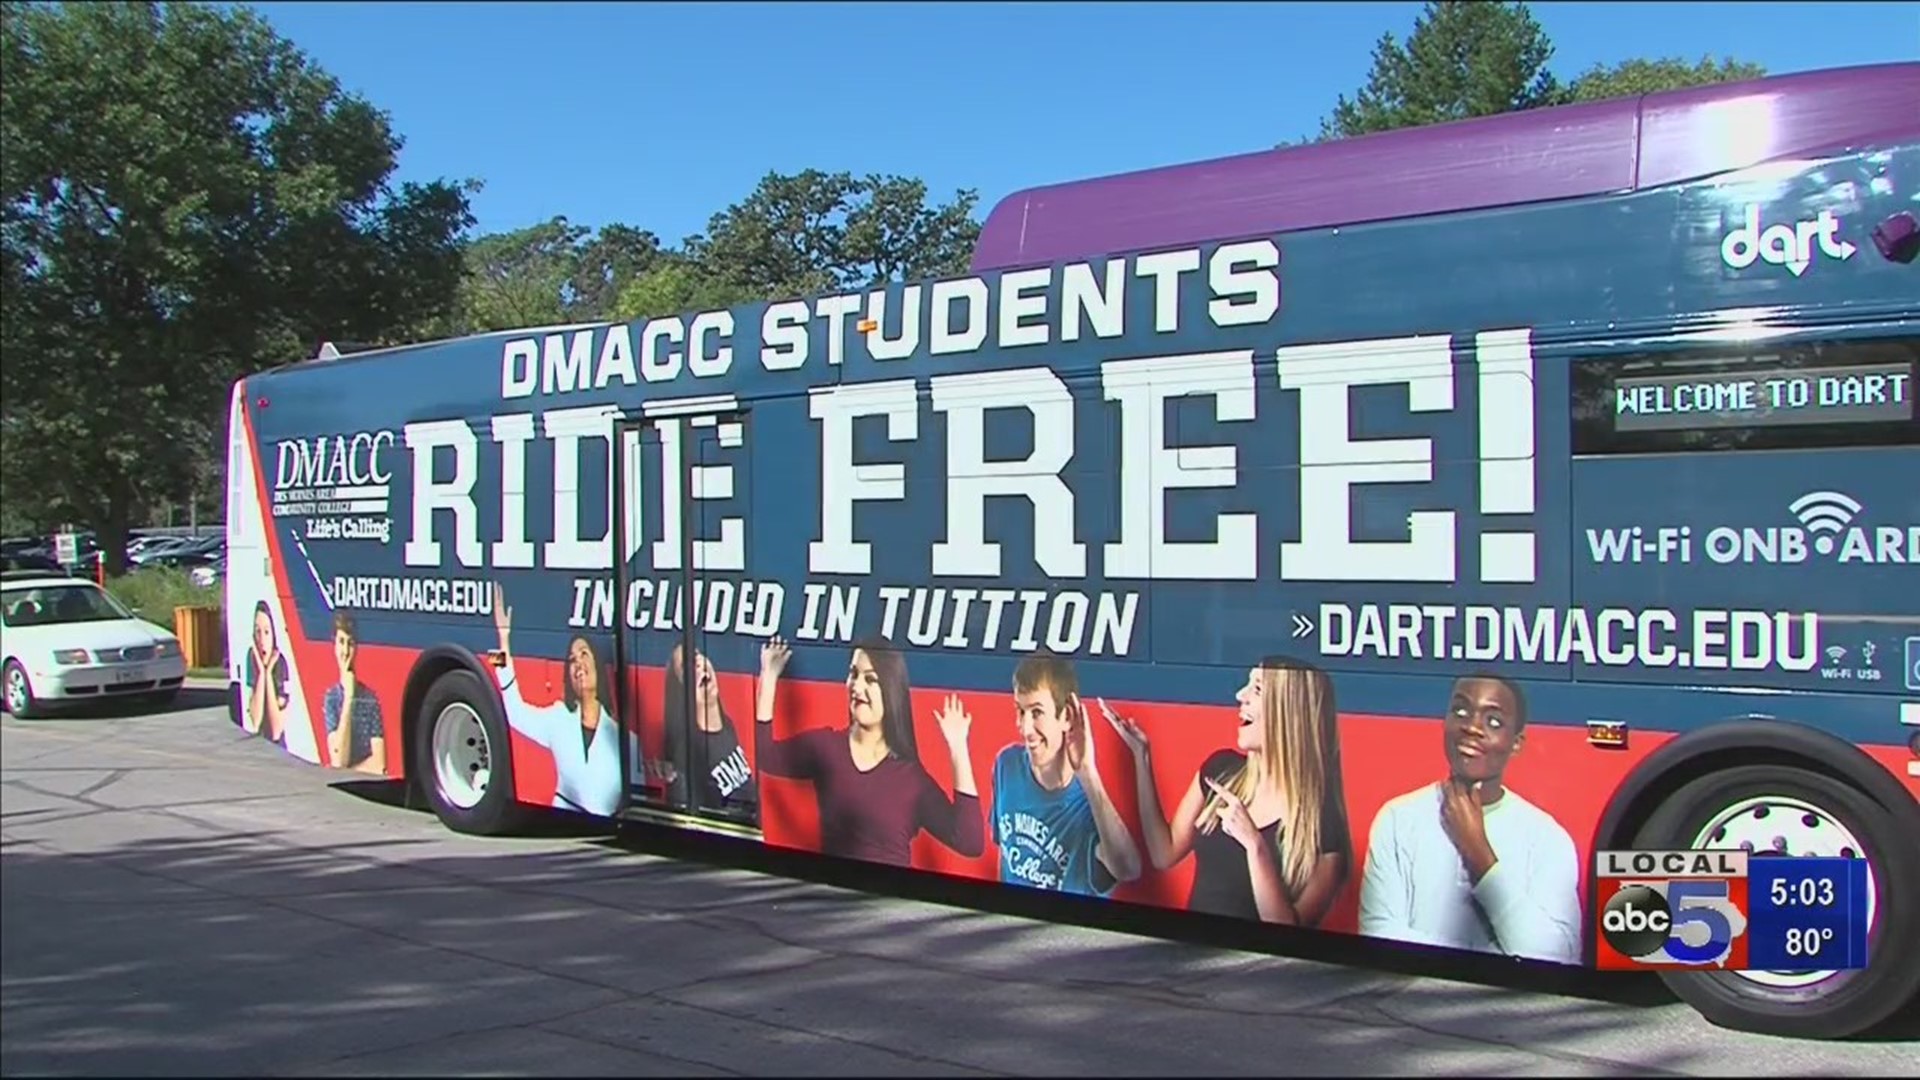 DMACC rides DART buses for free